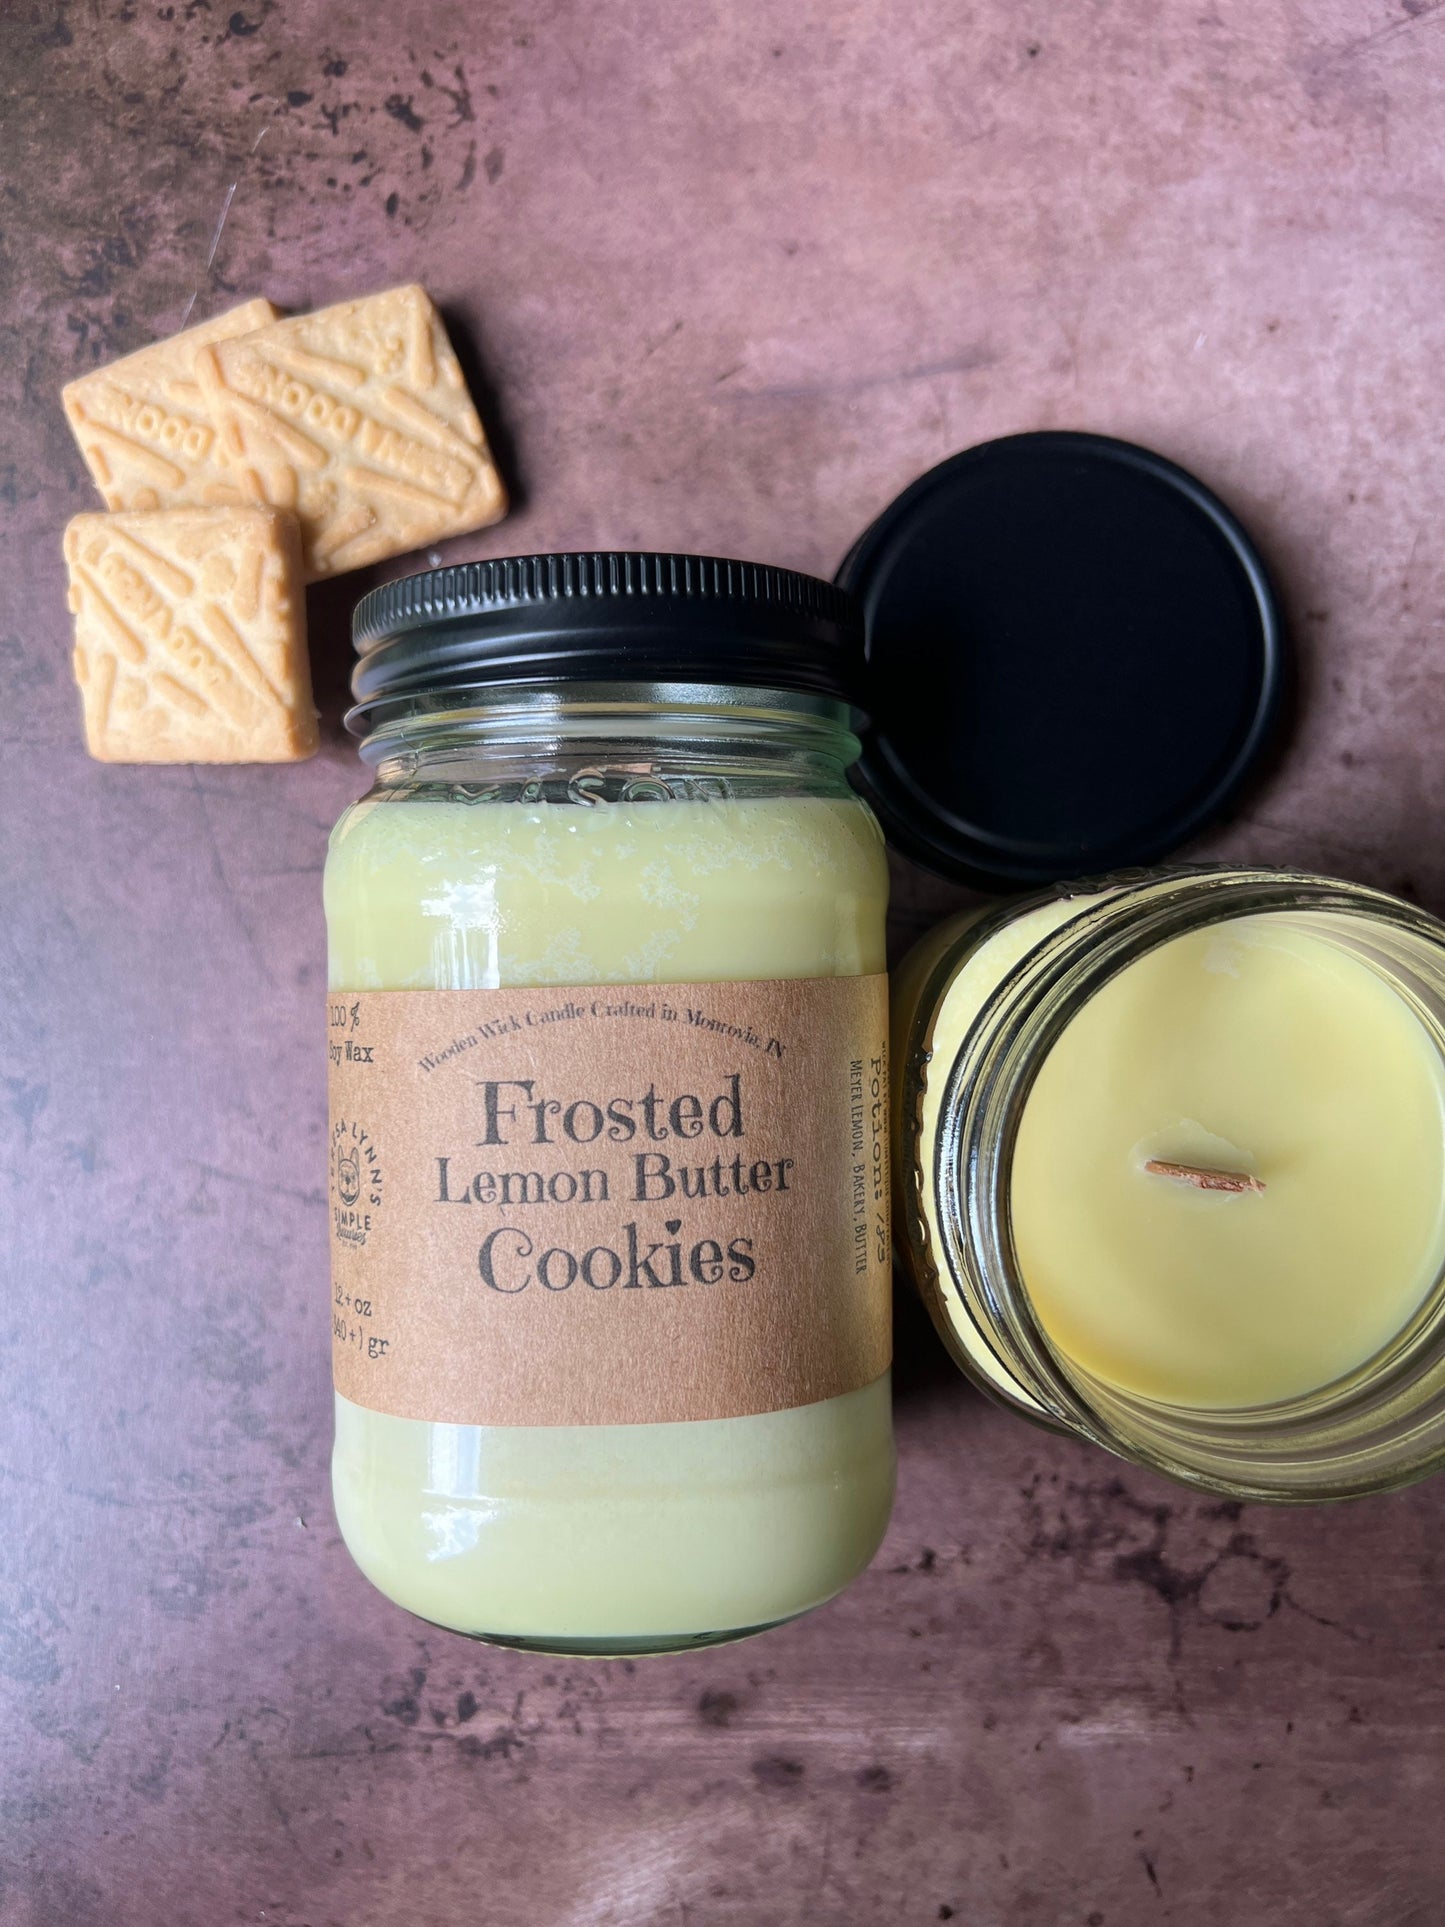 Frosted Lemon Butter Cookie, soy candle, gourmand, wooden wick, lemon, handmade, bakery candle, farmhouse kitchen, vegan, phthalate free